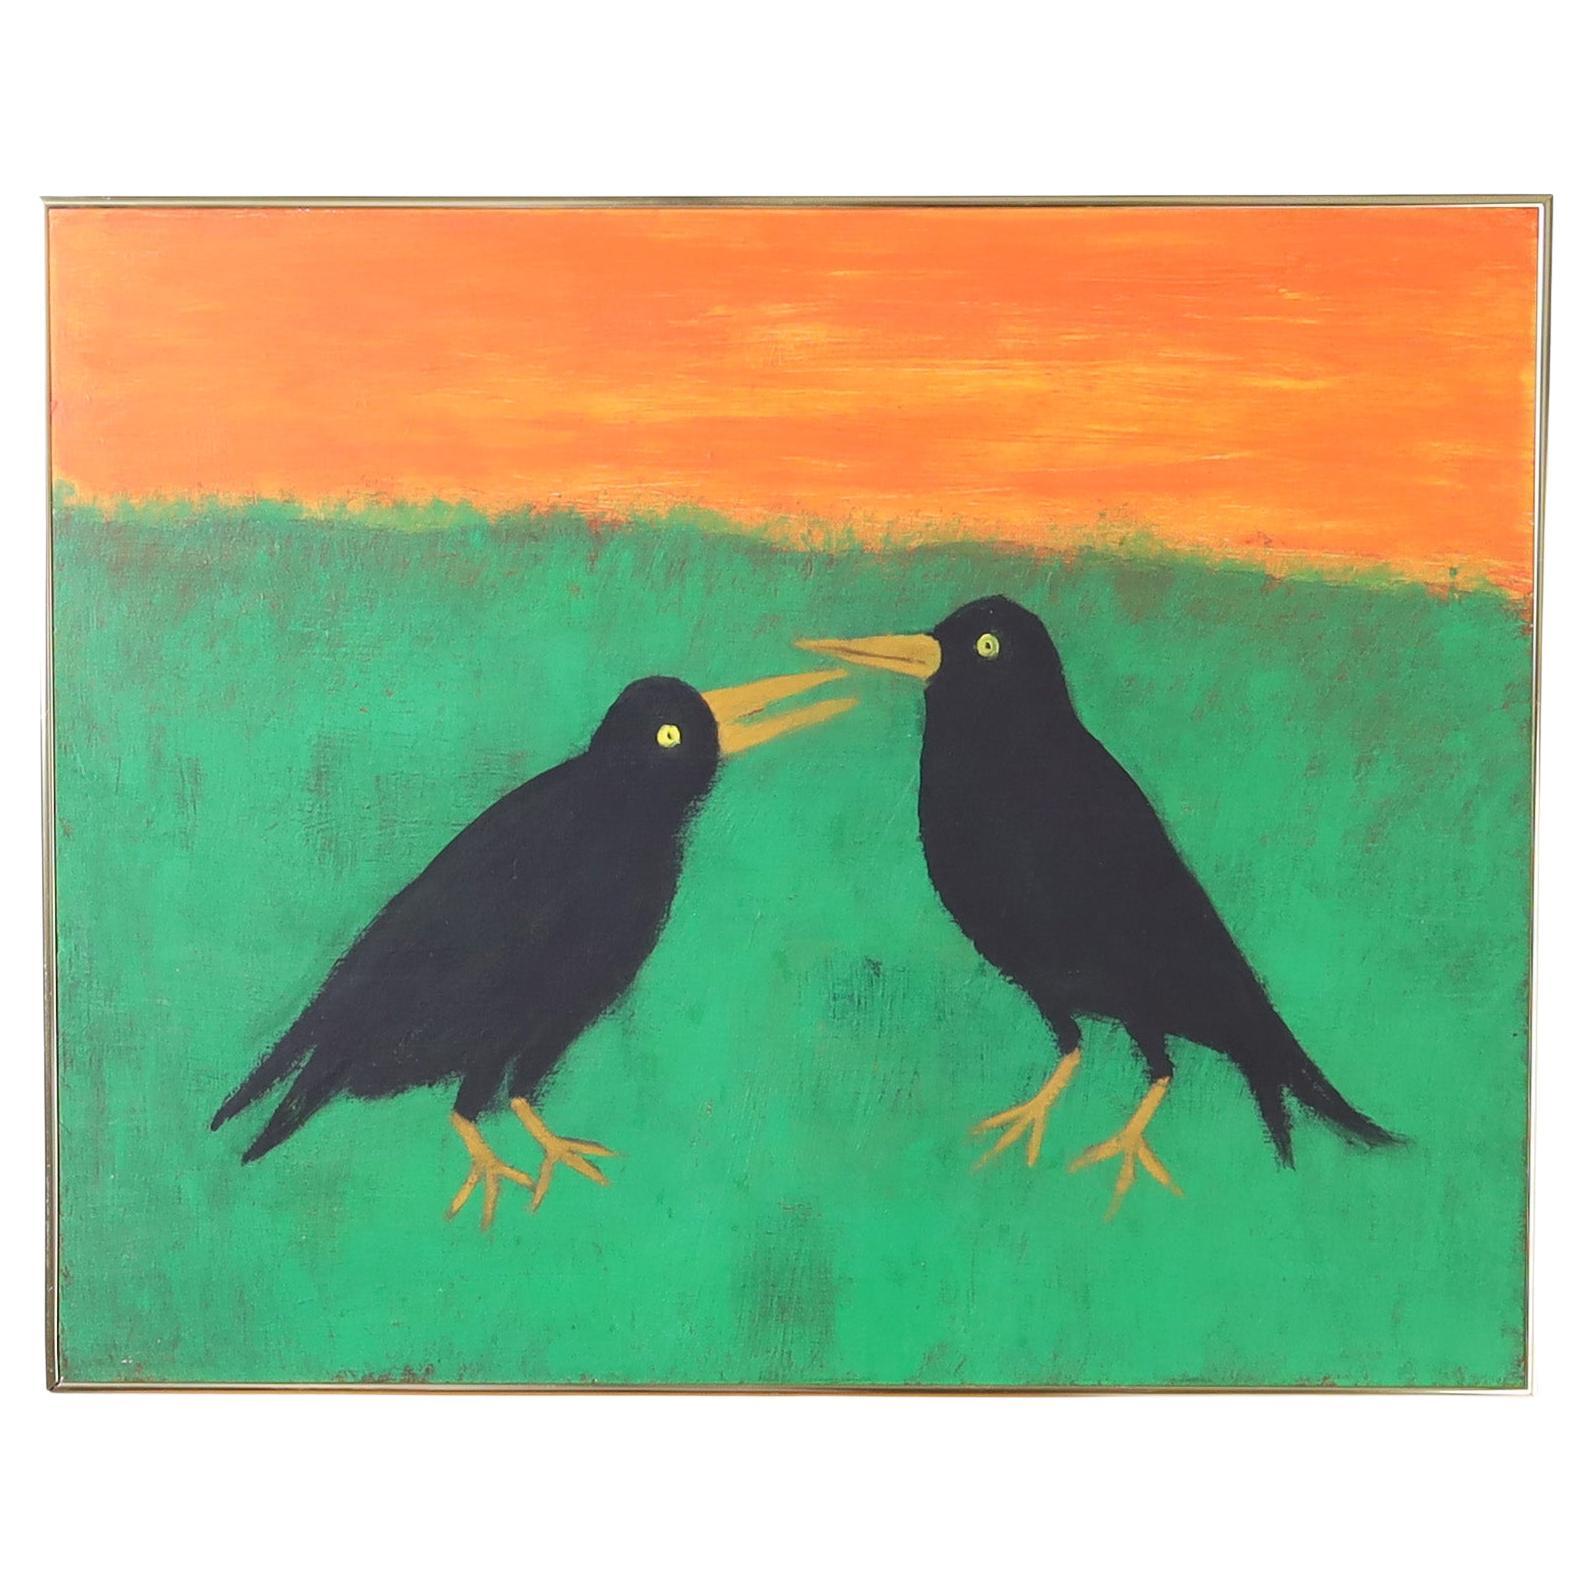 Vintage Folk Art Acrylic Painting on Board of Two Crows or Birds For Sale